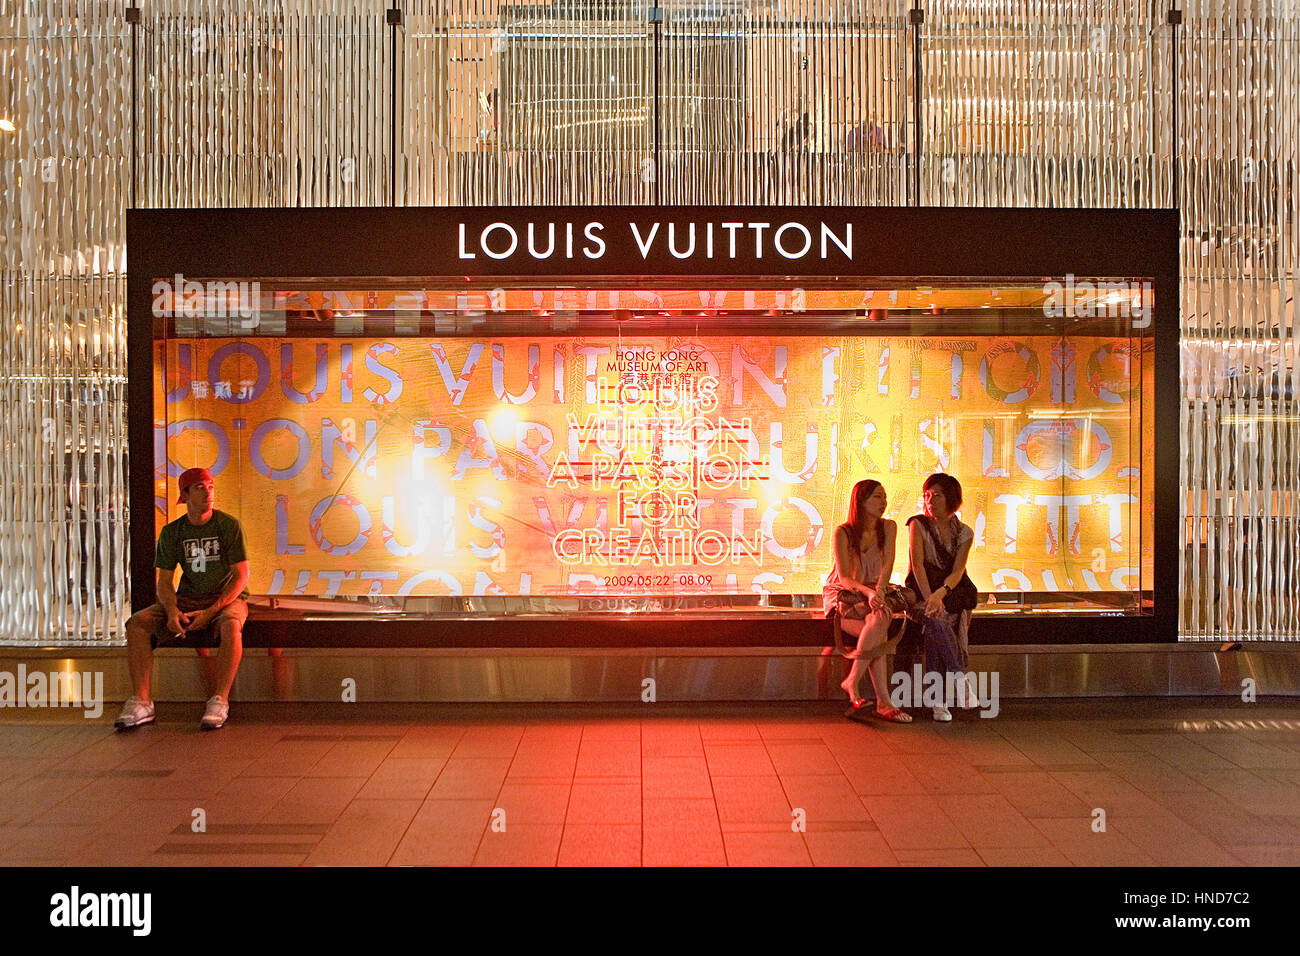 Louis Vuitton Showroom Entry Editorial Stock Photo - Image of expensive,  commercial: 220019878